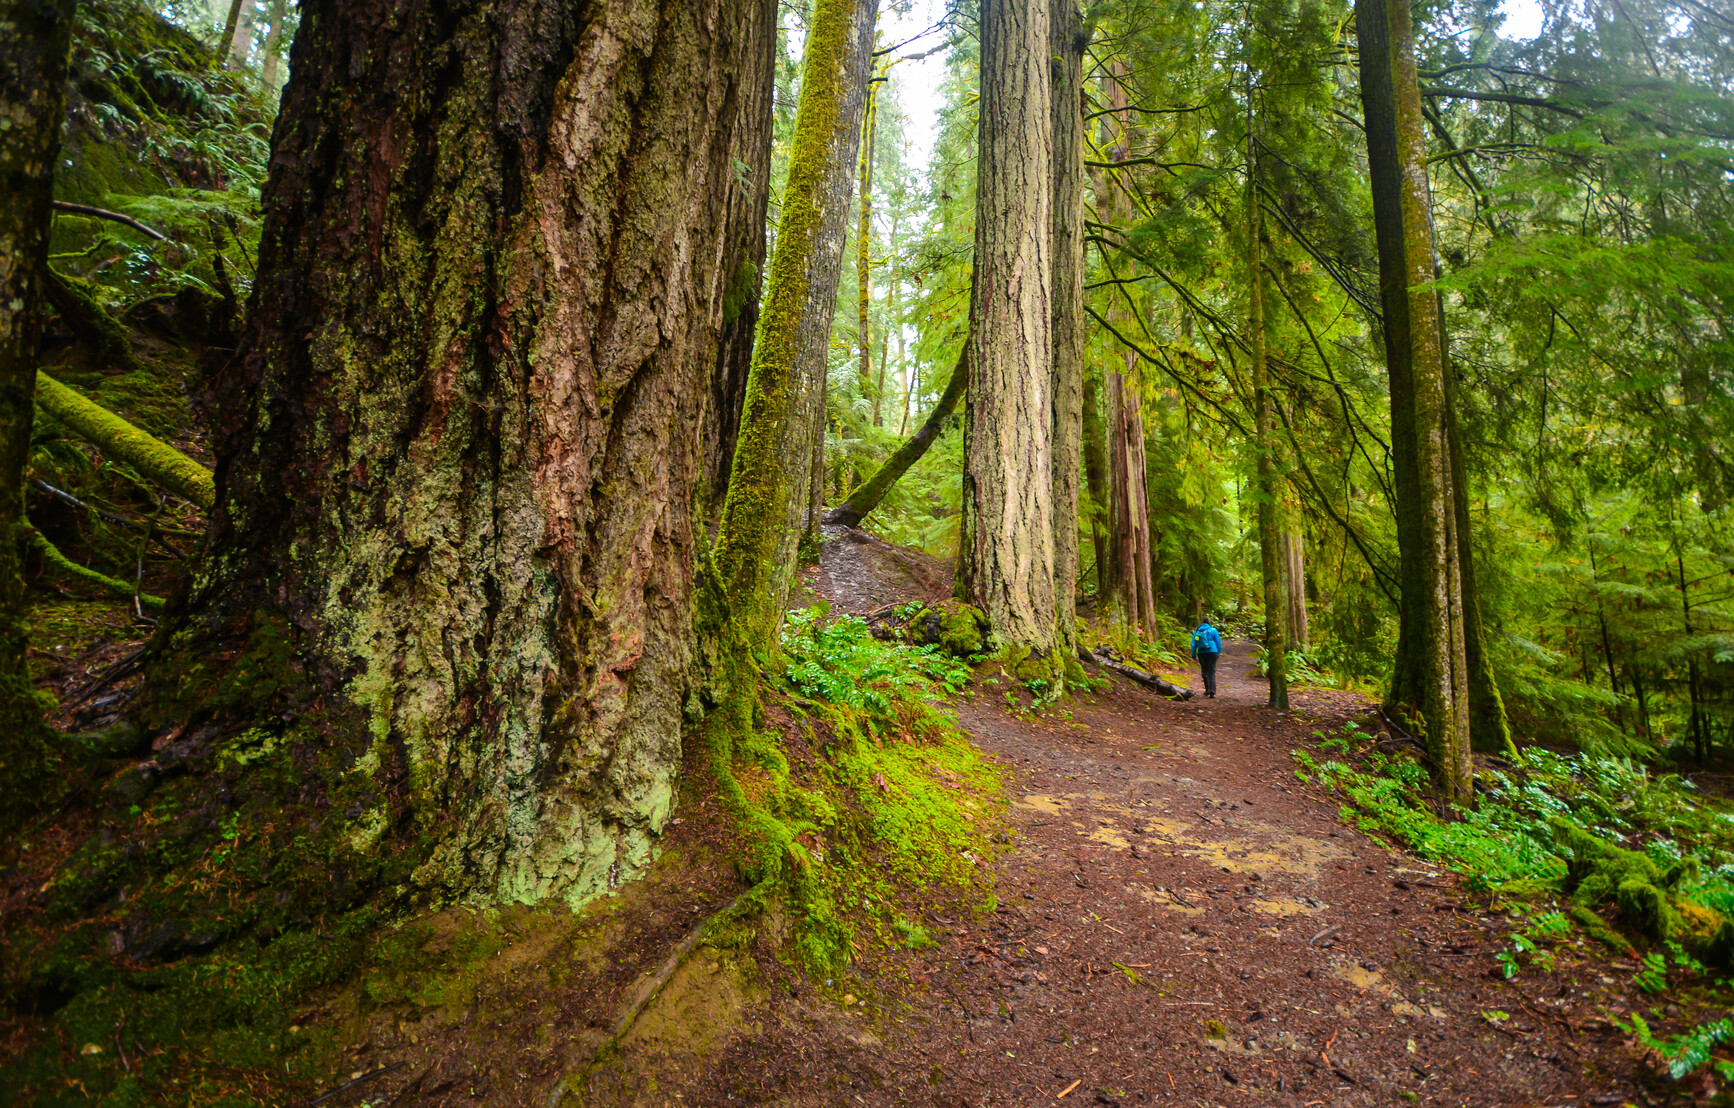 Hiker on forest trail with old growth tree.